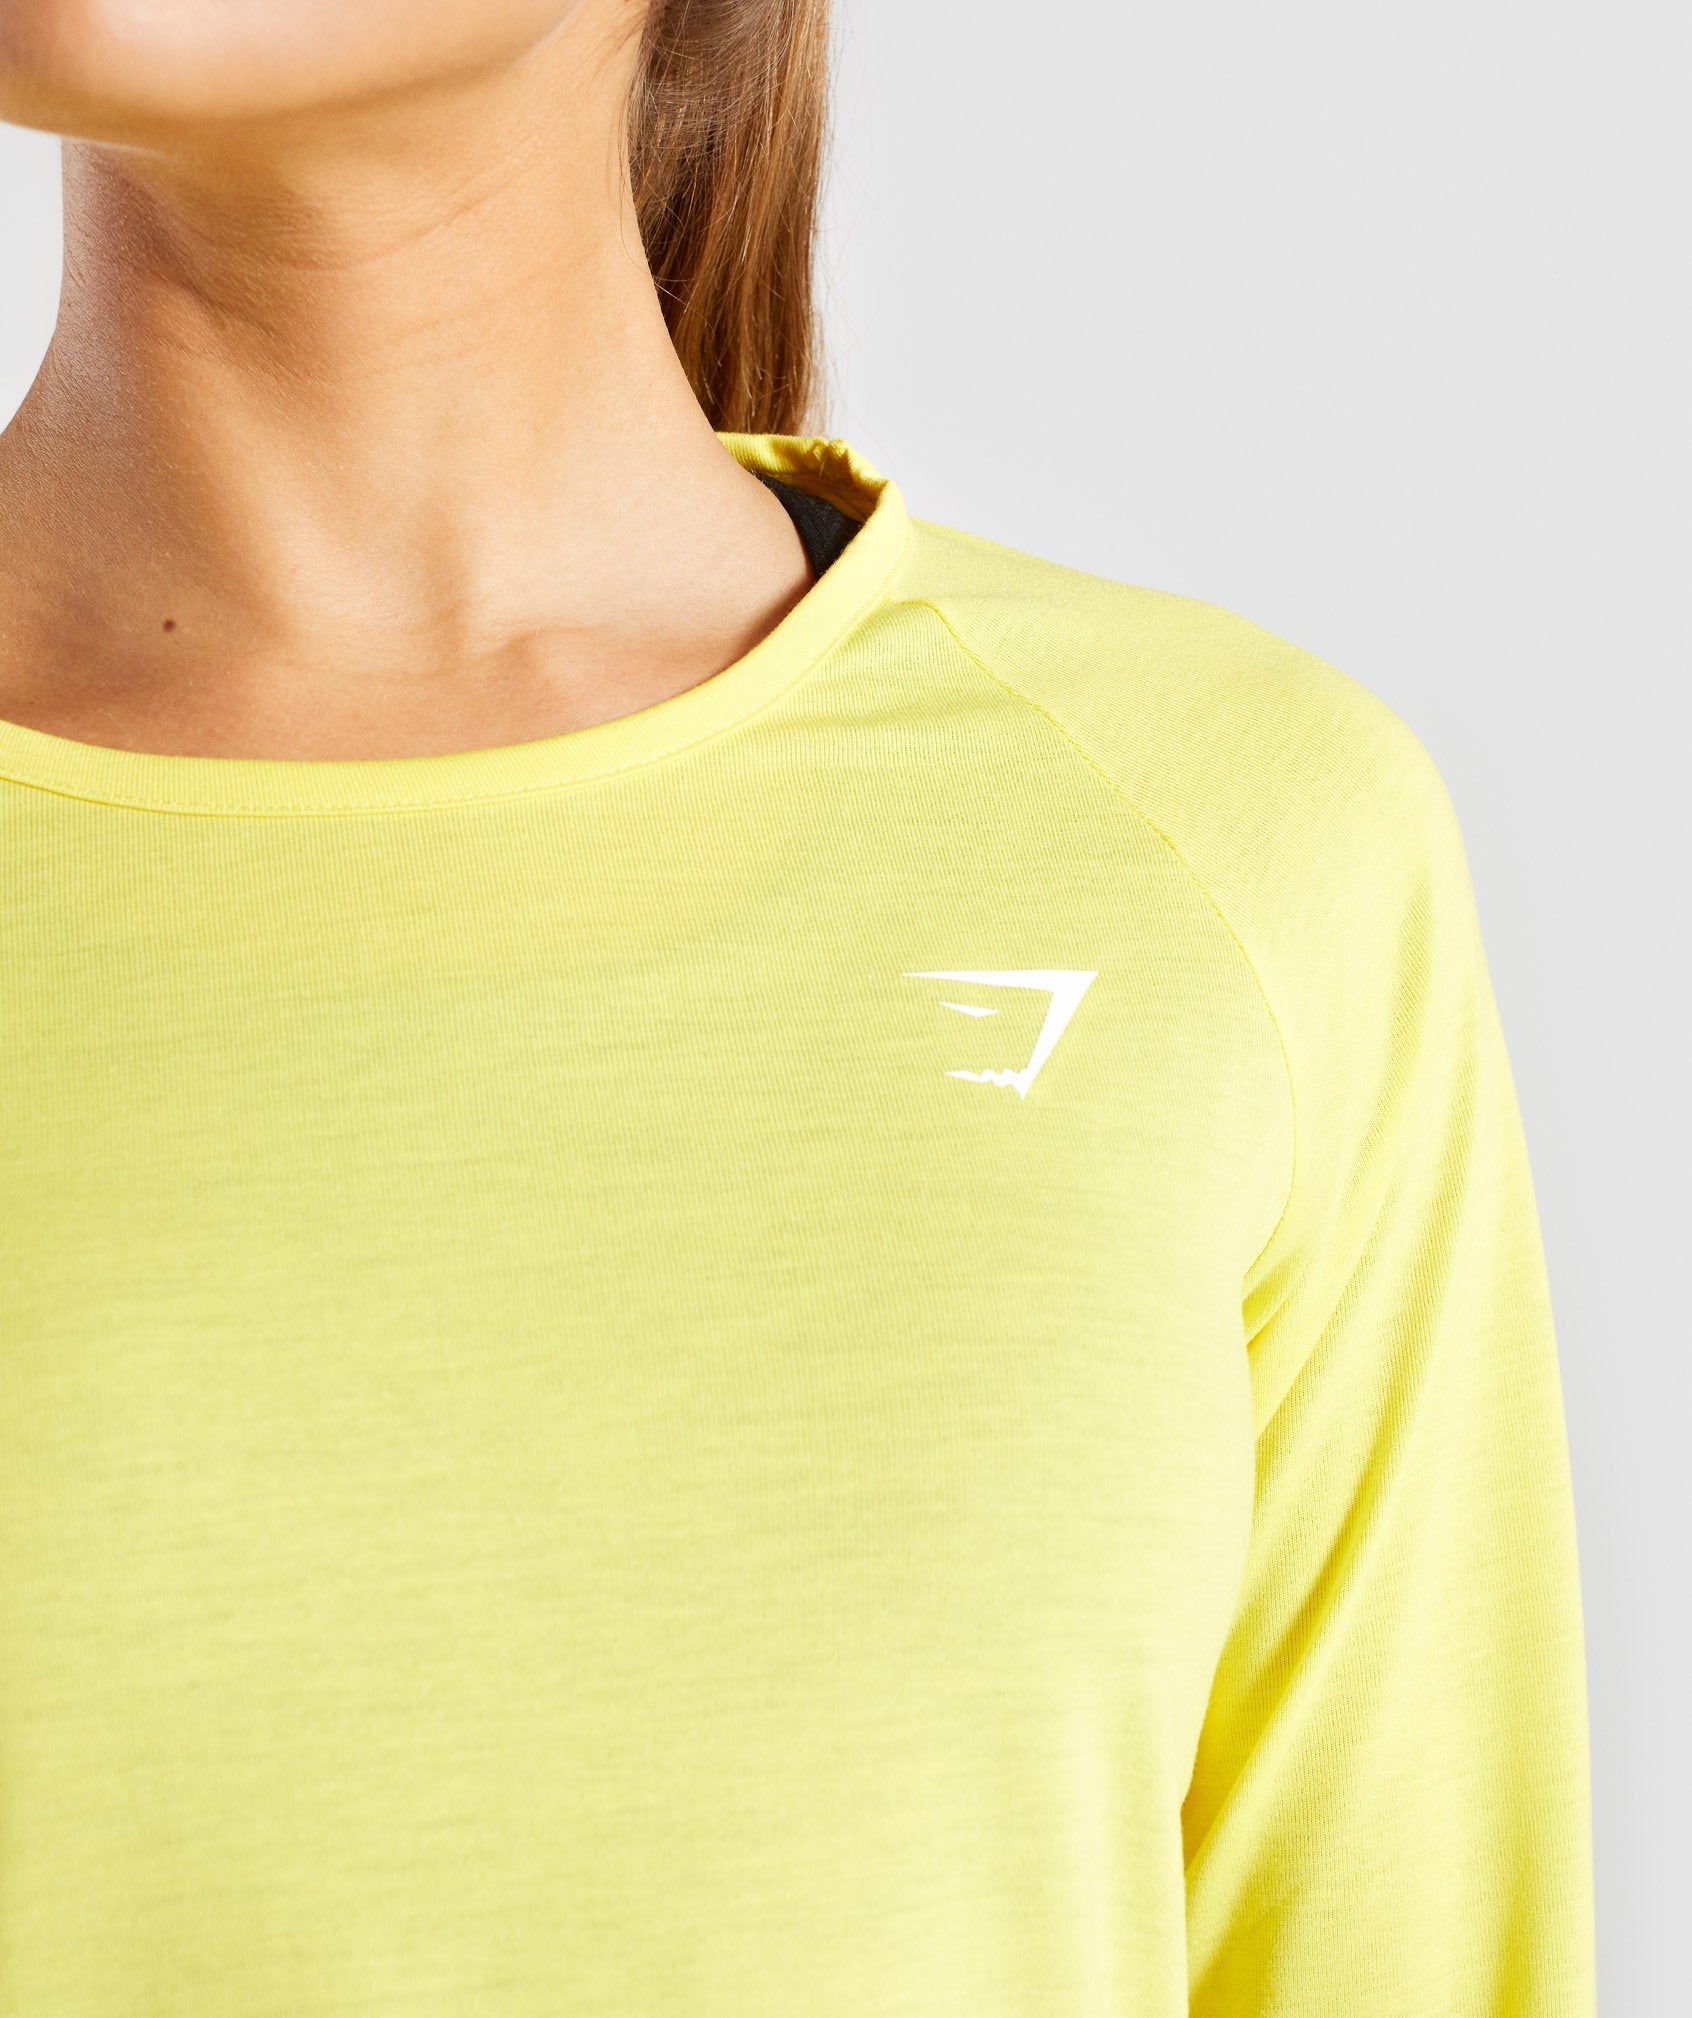 Primary Open Cross Back Long Sleeve in Pop Yellow - view 5